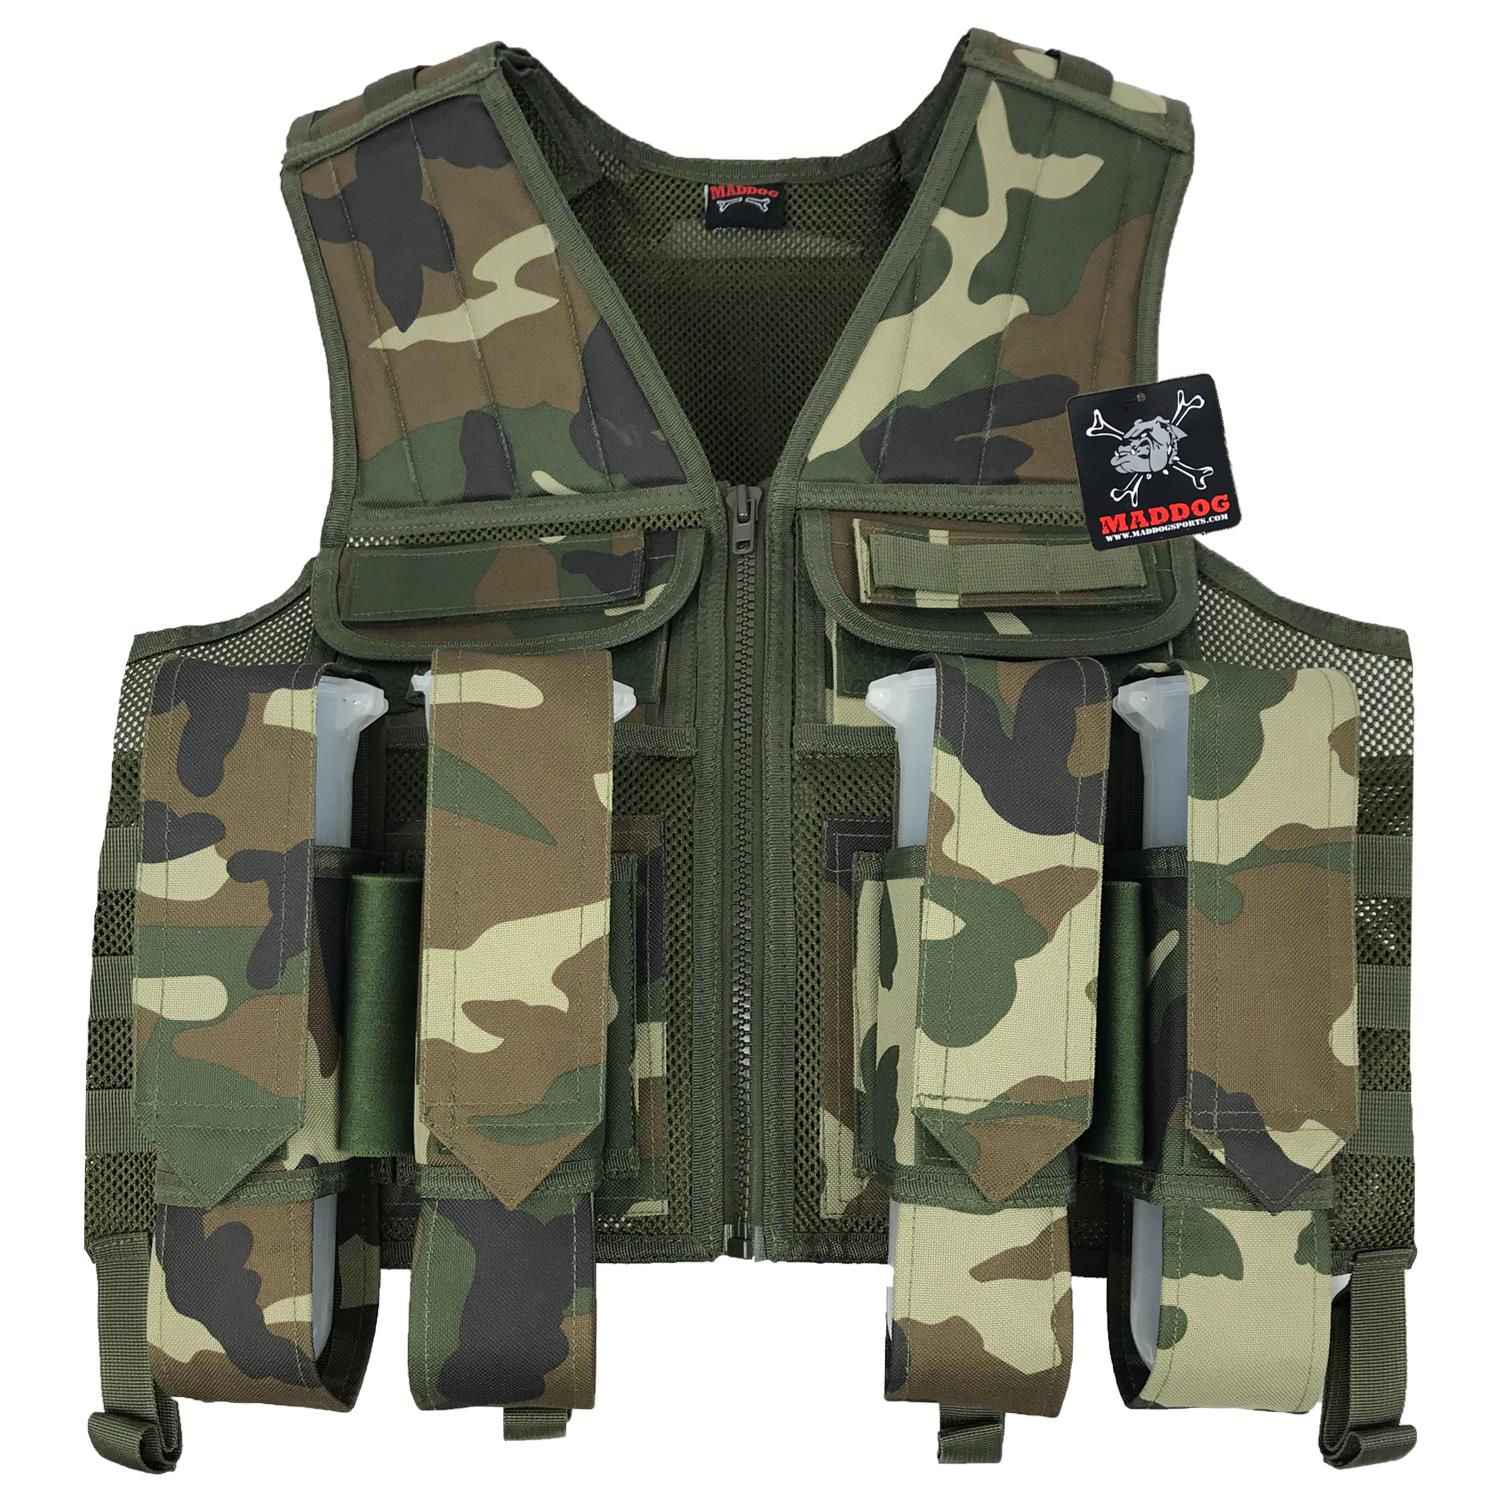 Maddog Tactical Battle Vest w/ Pods & Standard Remote Coil Paintball Package - Woodland Camo Maddog